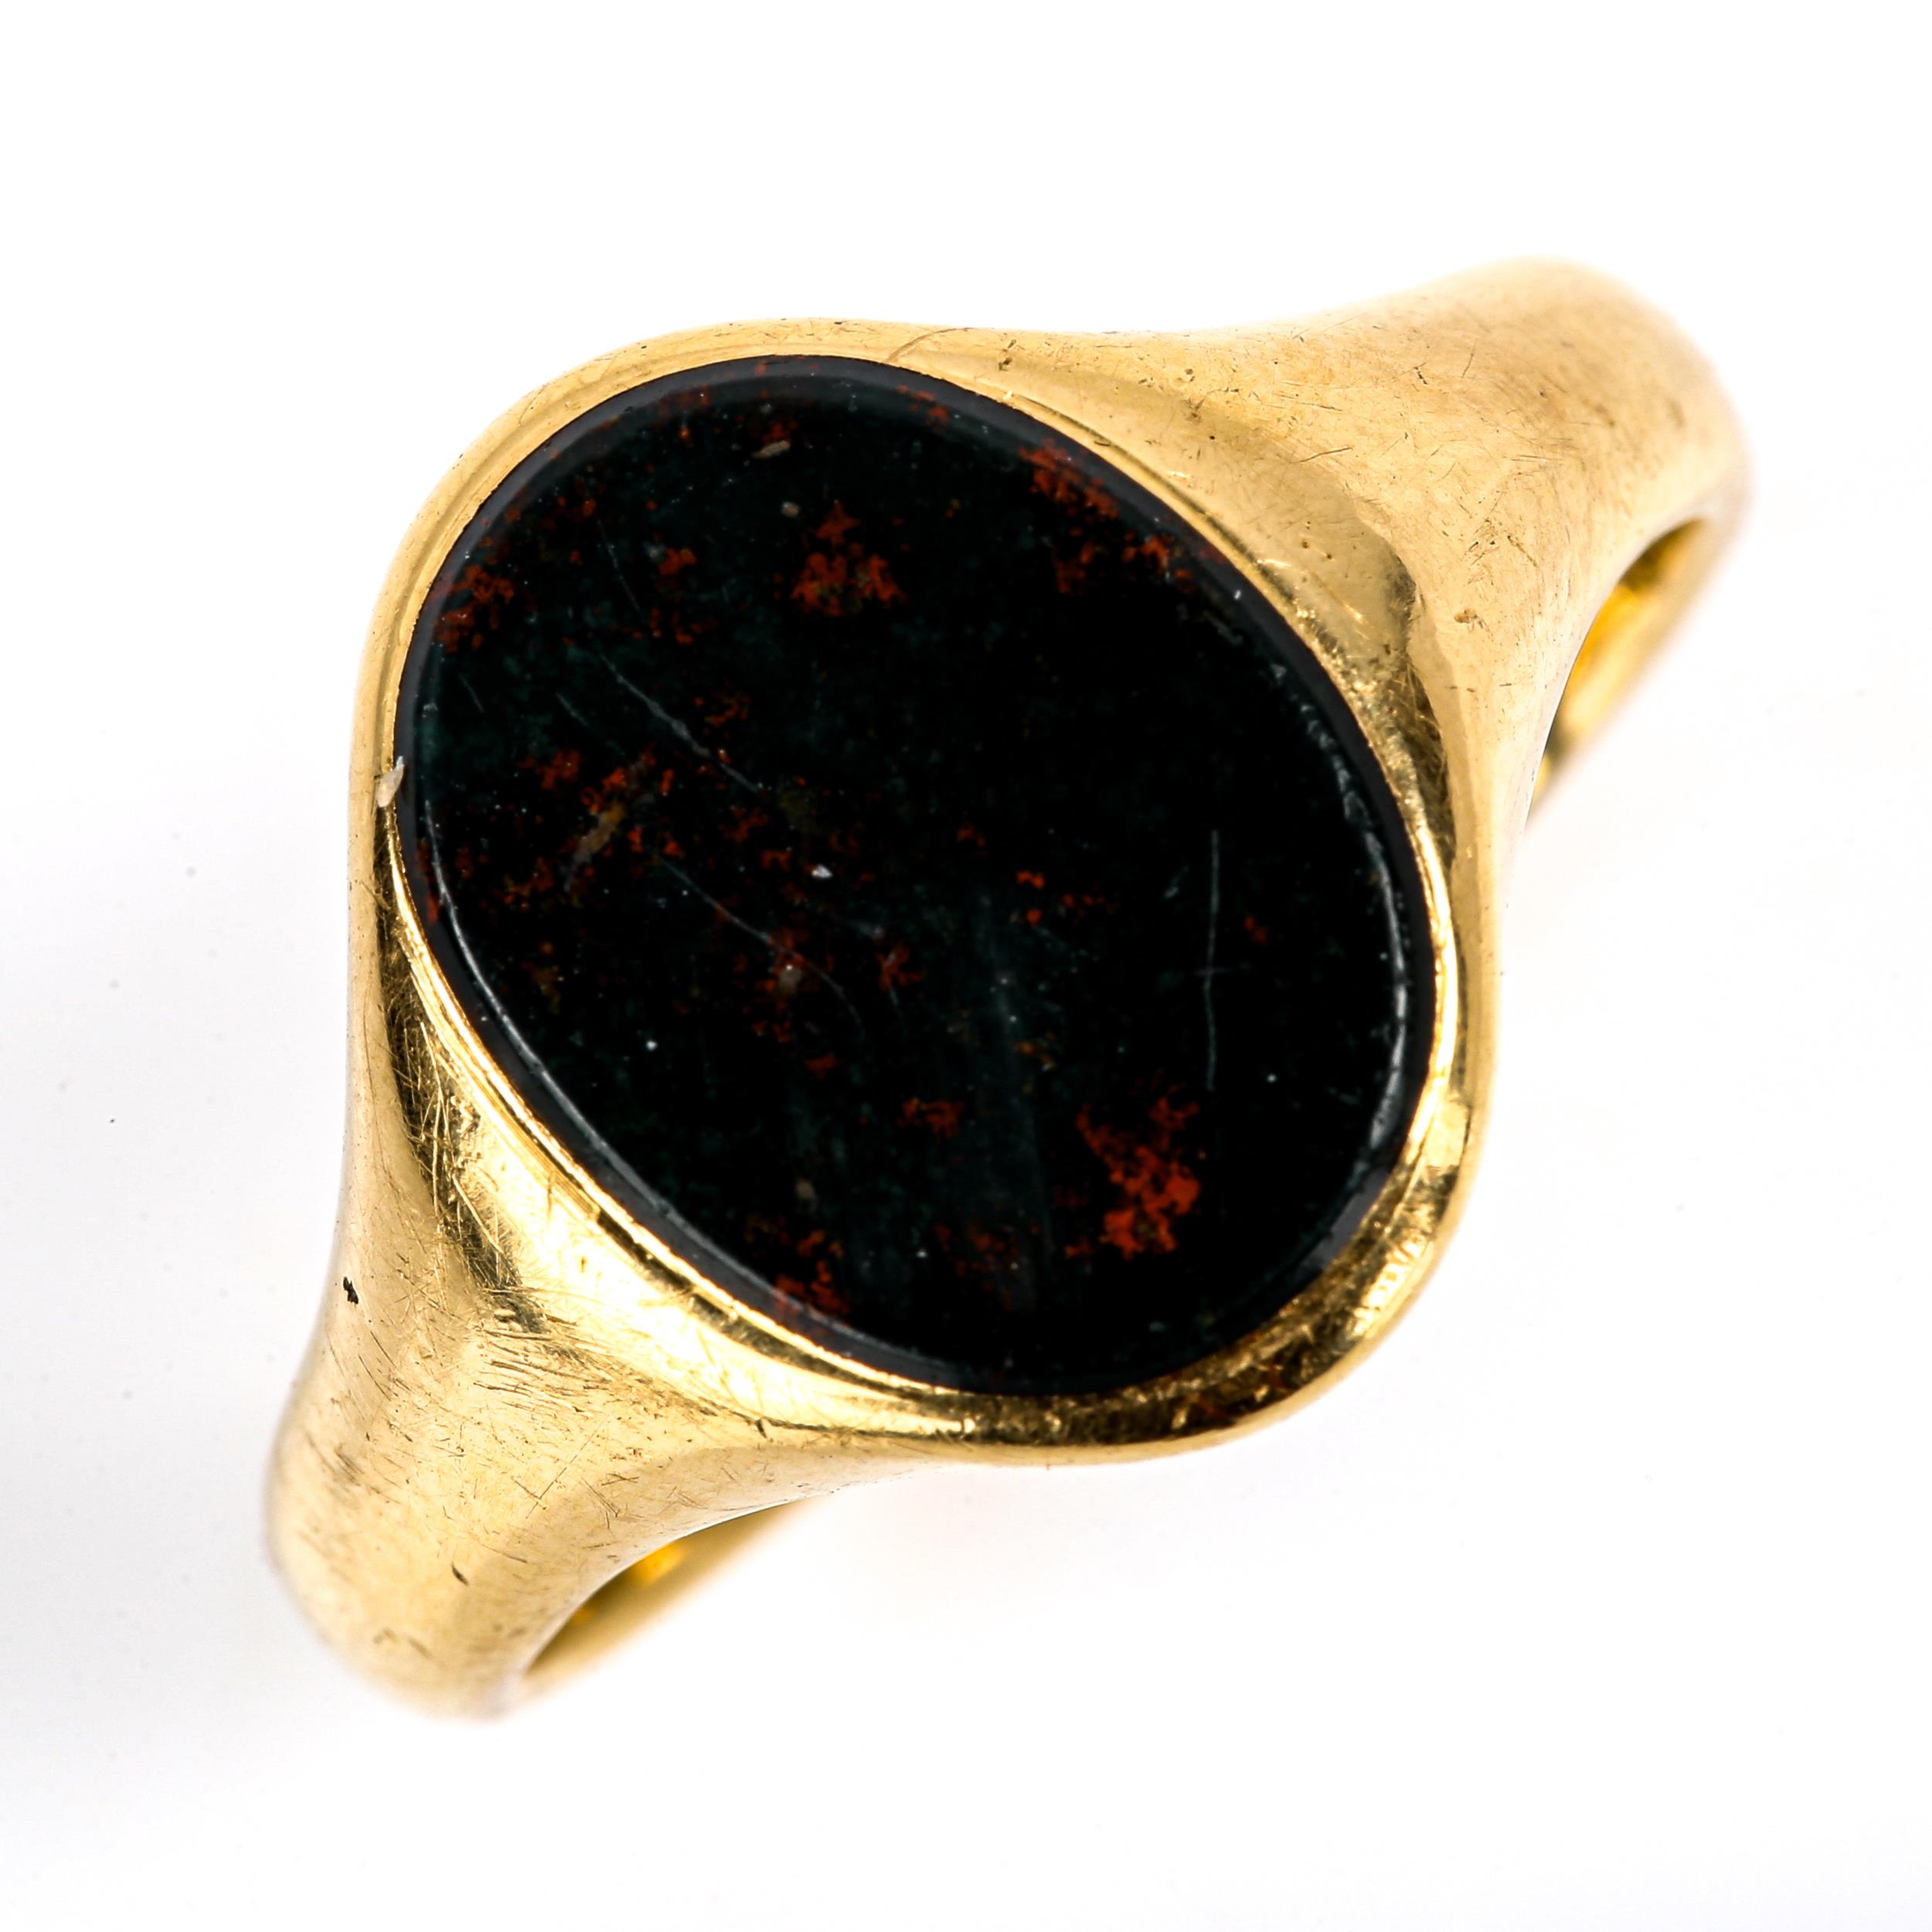 An early 20th century 18ct gold bloodstone signet ring, by Henry Griffith & Sons Ltd, hallmarks